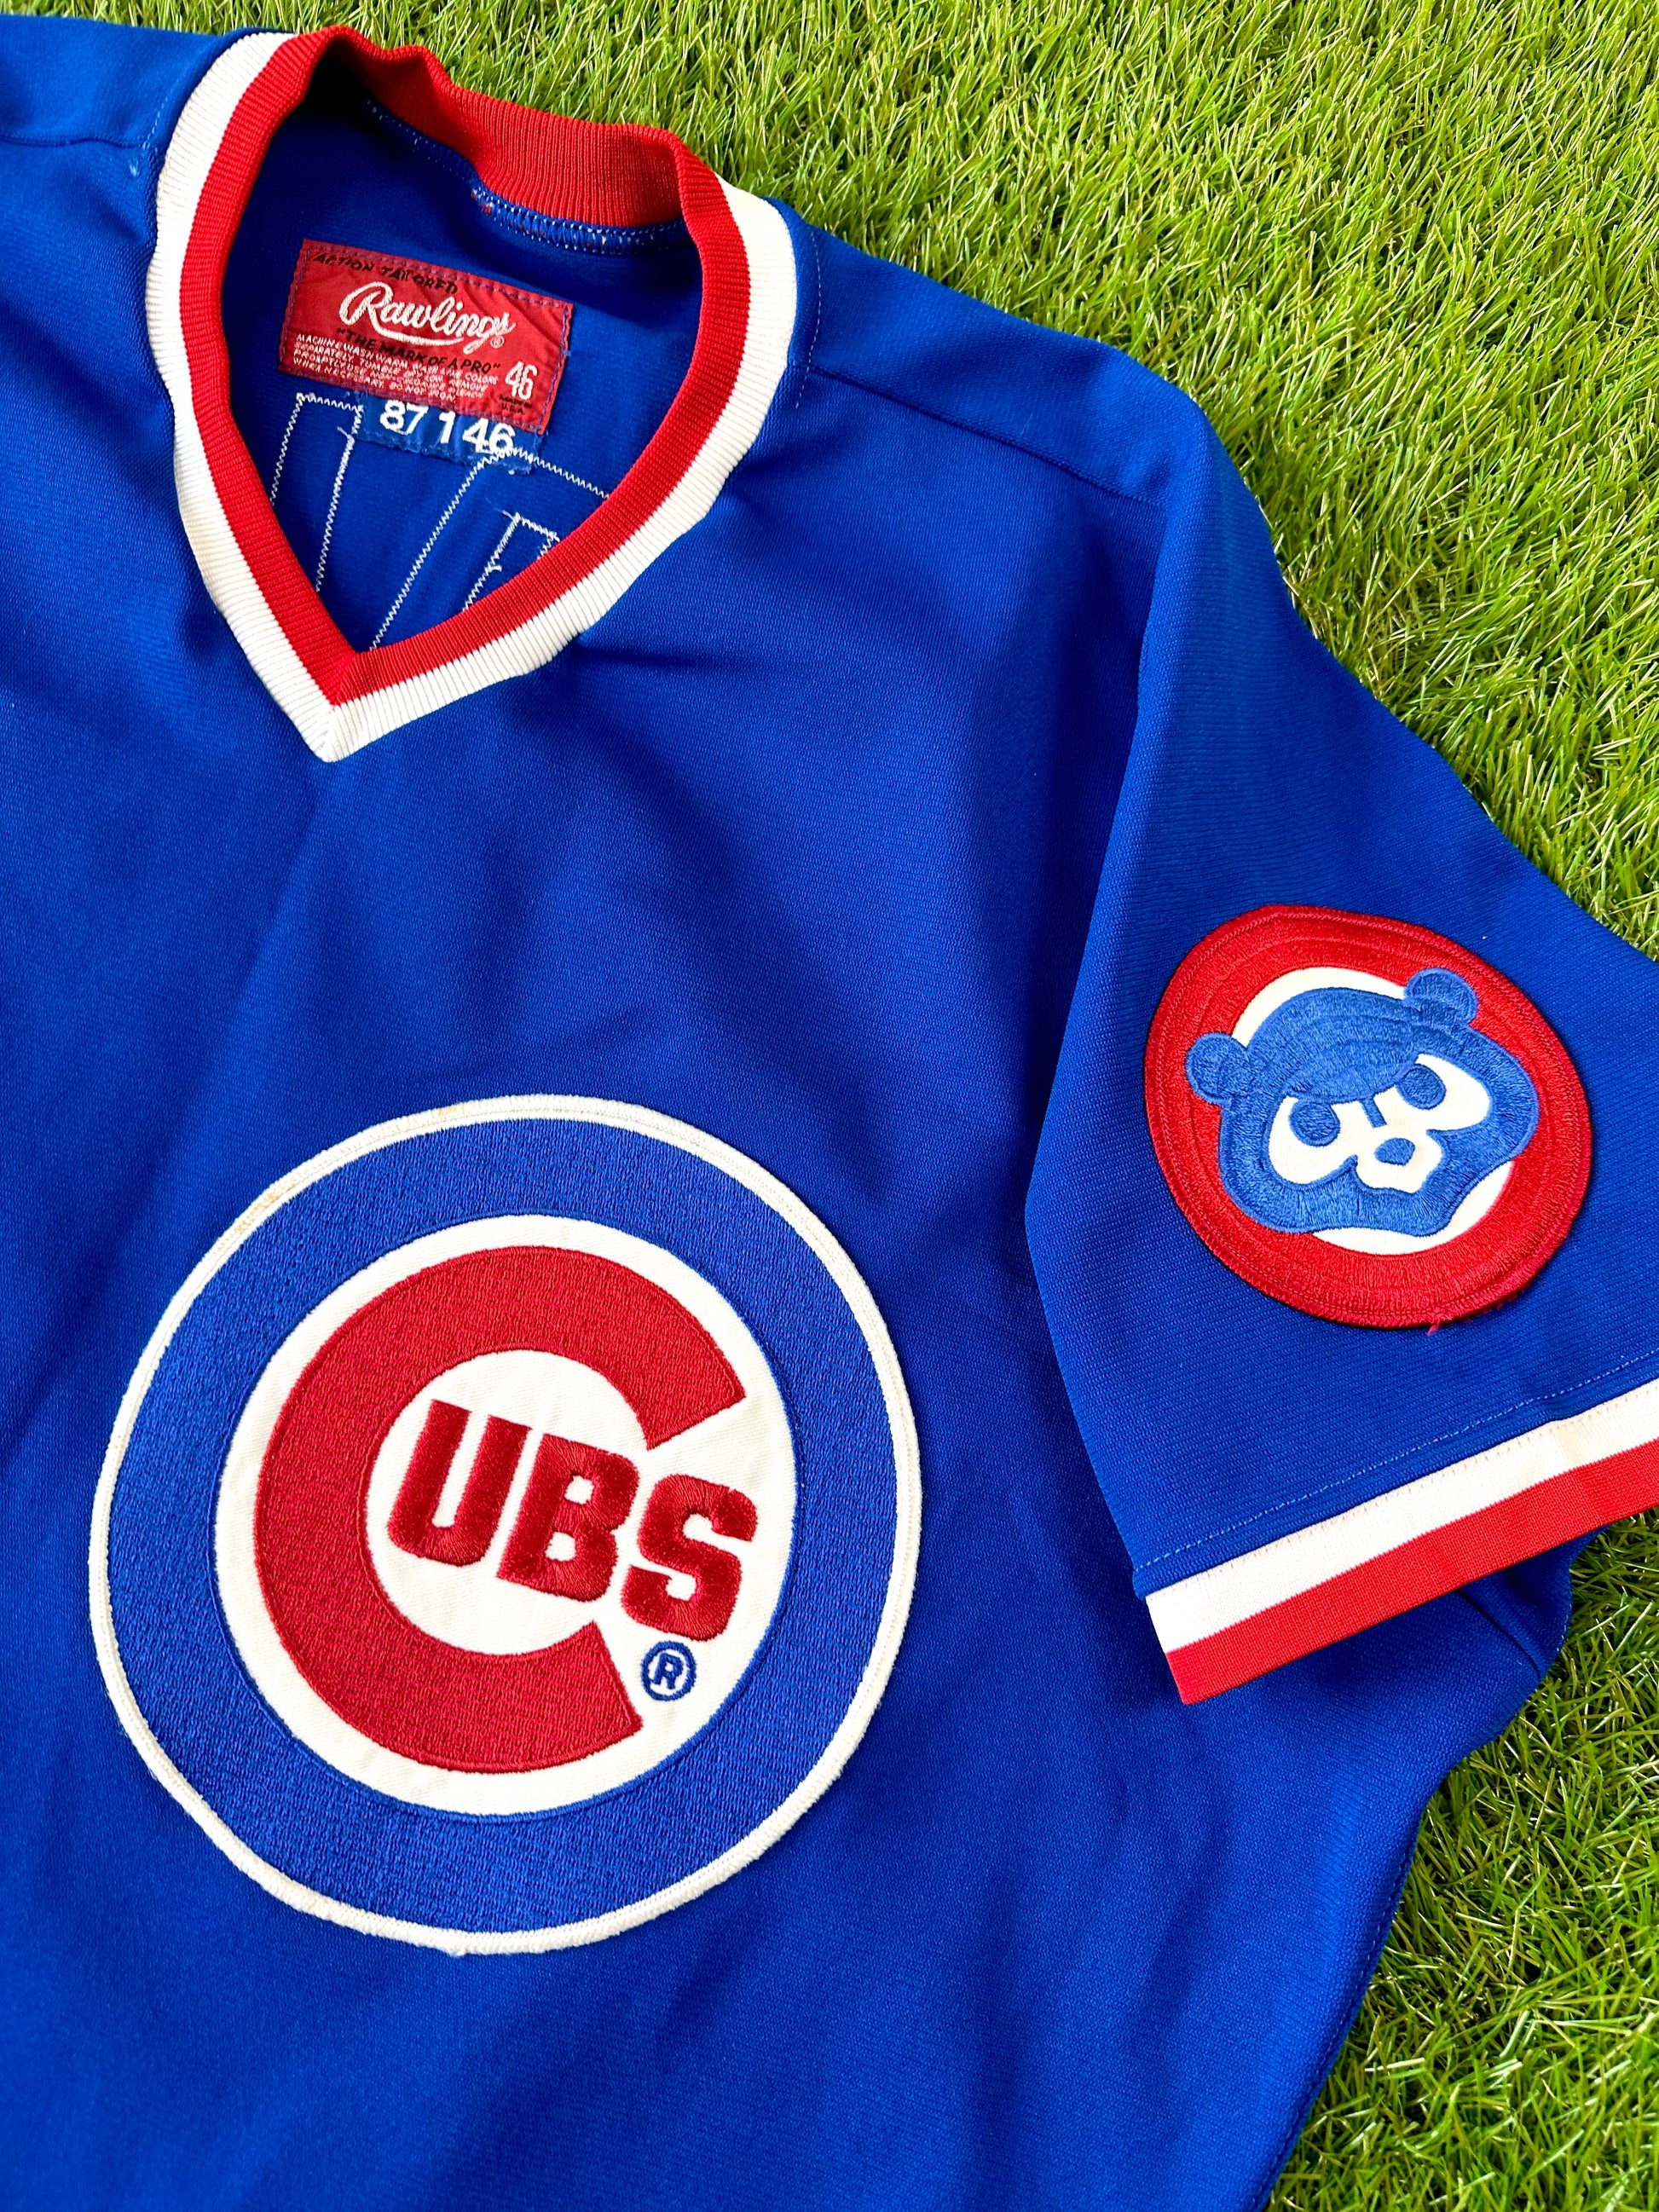 Cubs jersey size large for Sale in Gary, IN - OfferUp